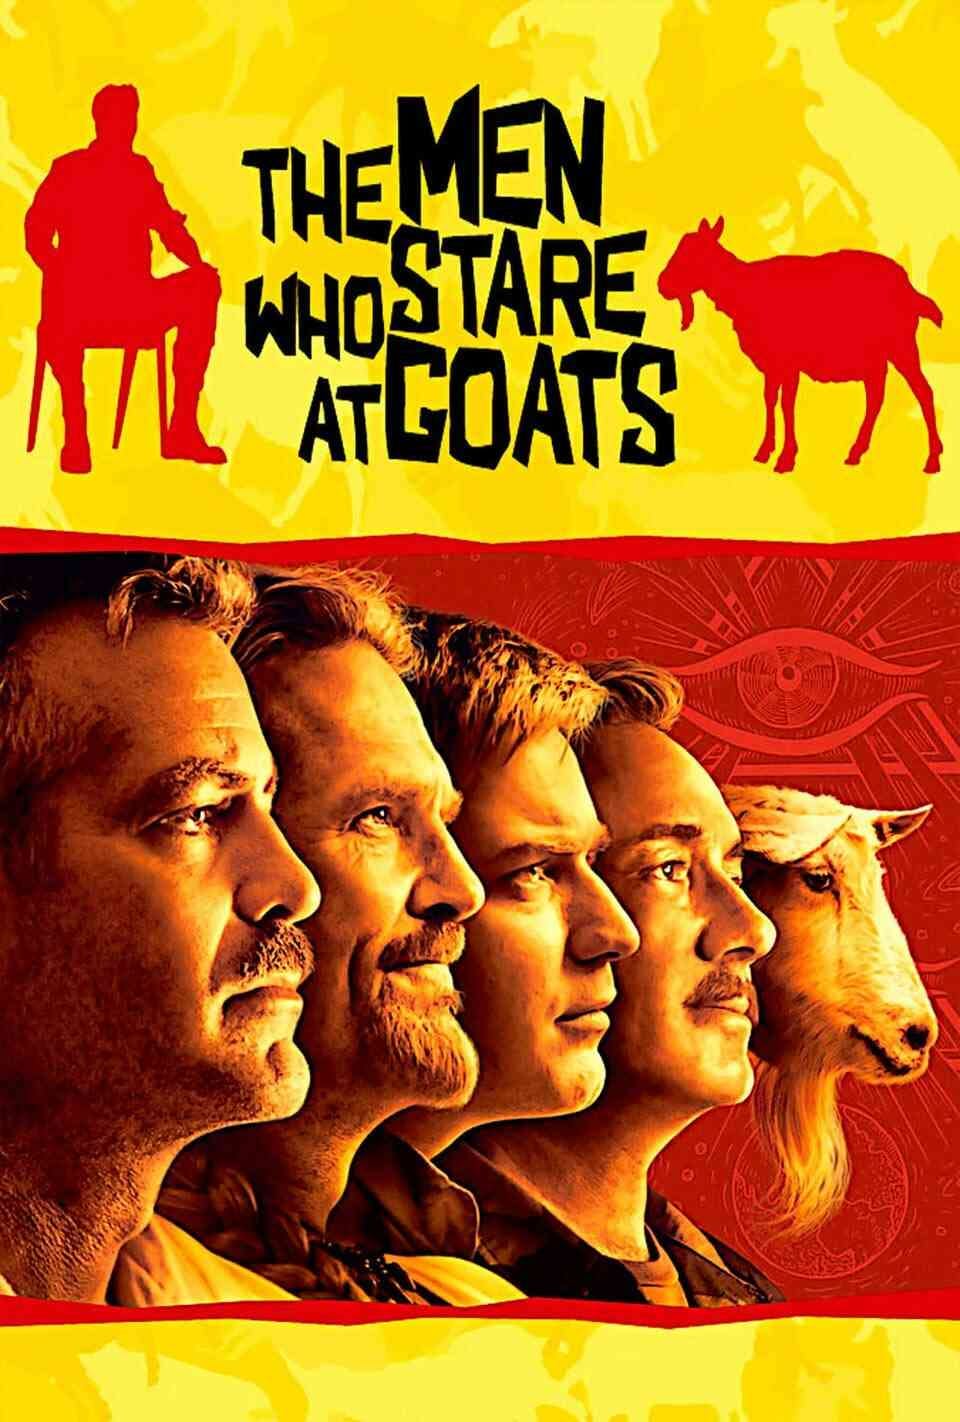 Read The Men Who Stare at Goats screenplay.